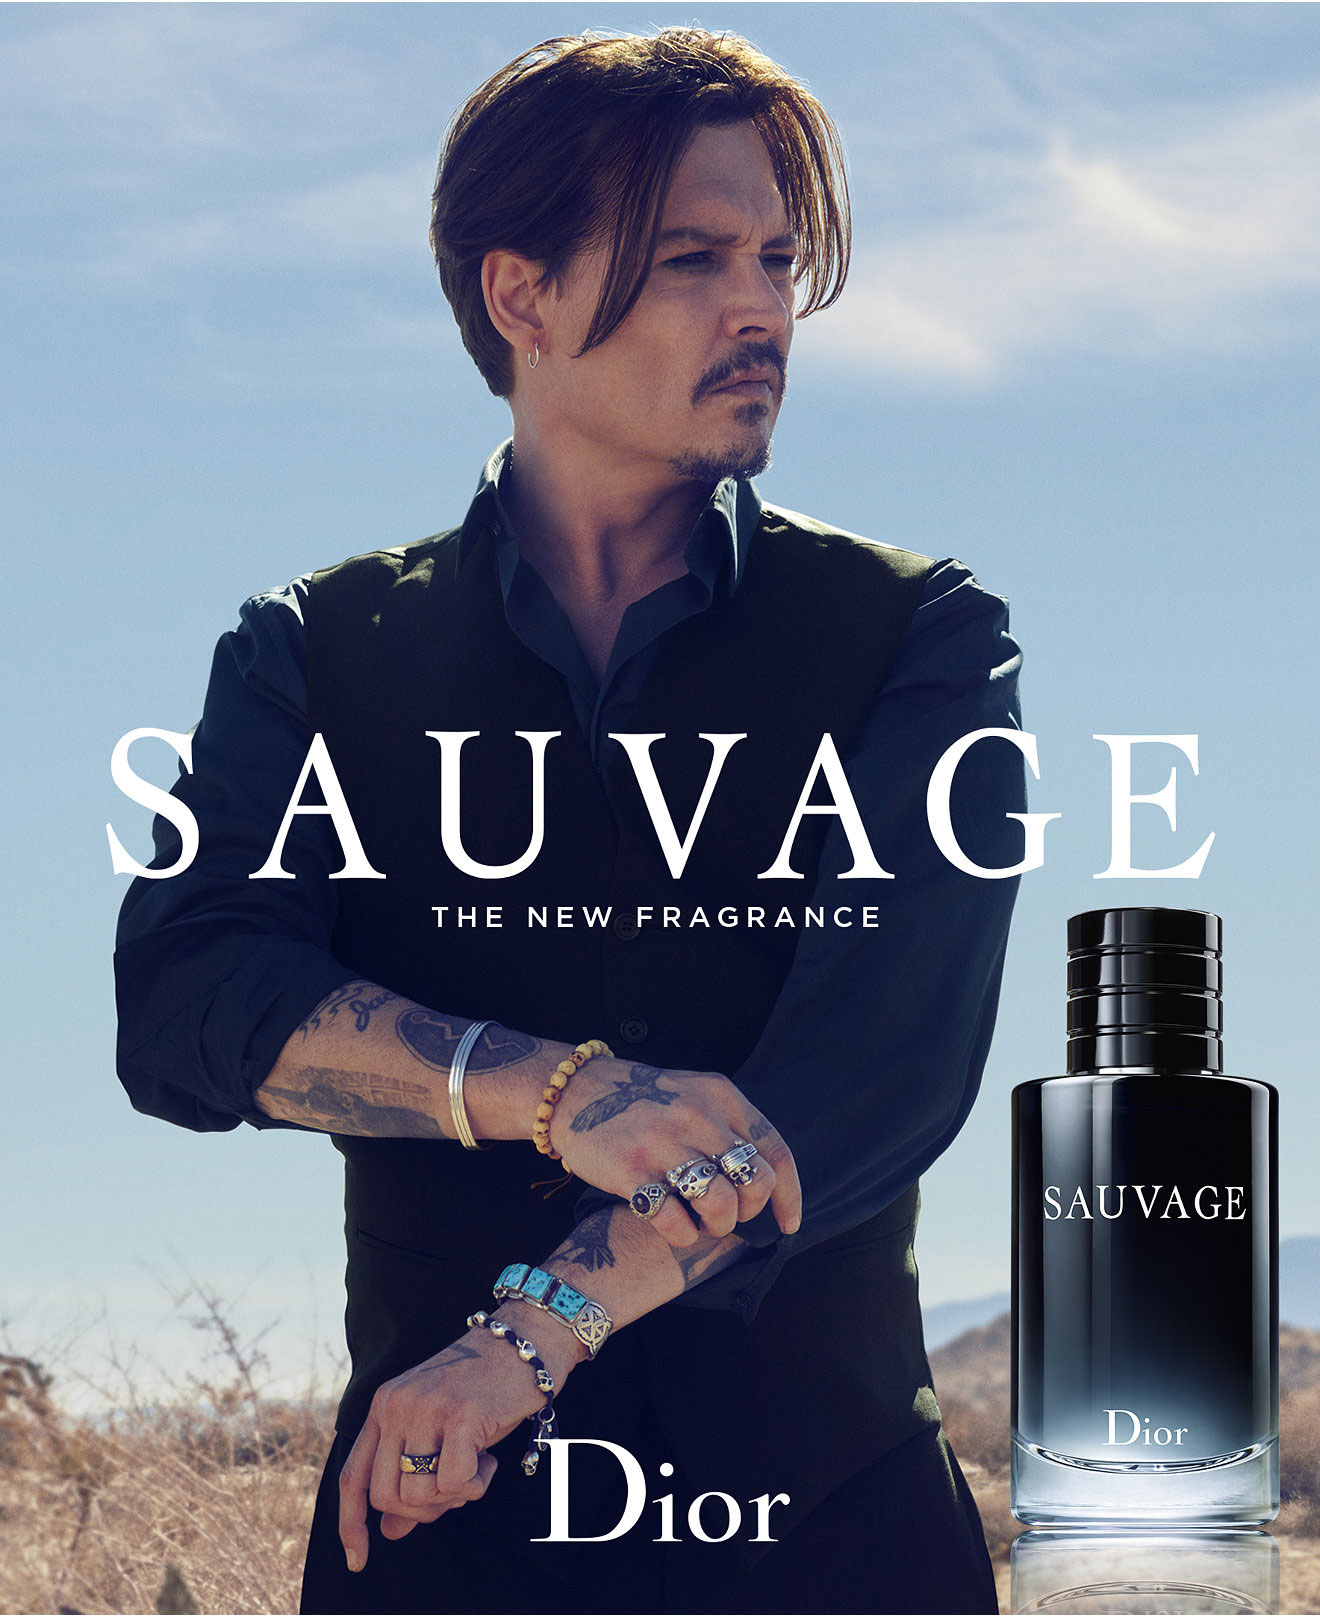 What Cologne Does Johnny Depp Endorse - Grooming Wise